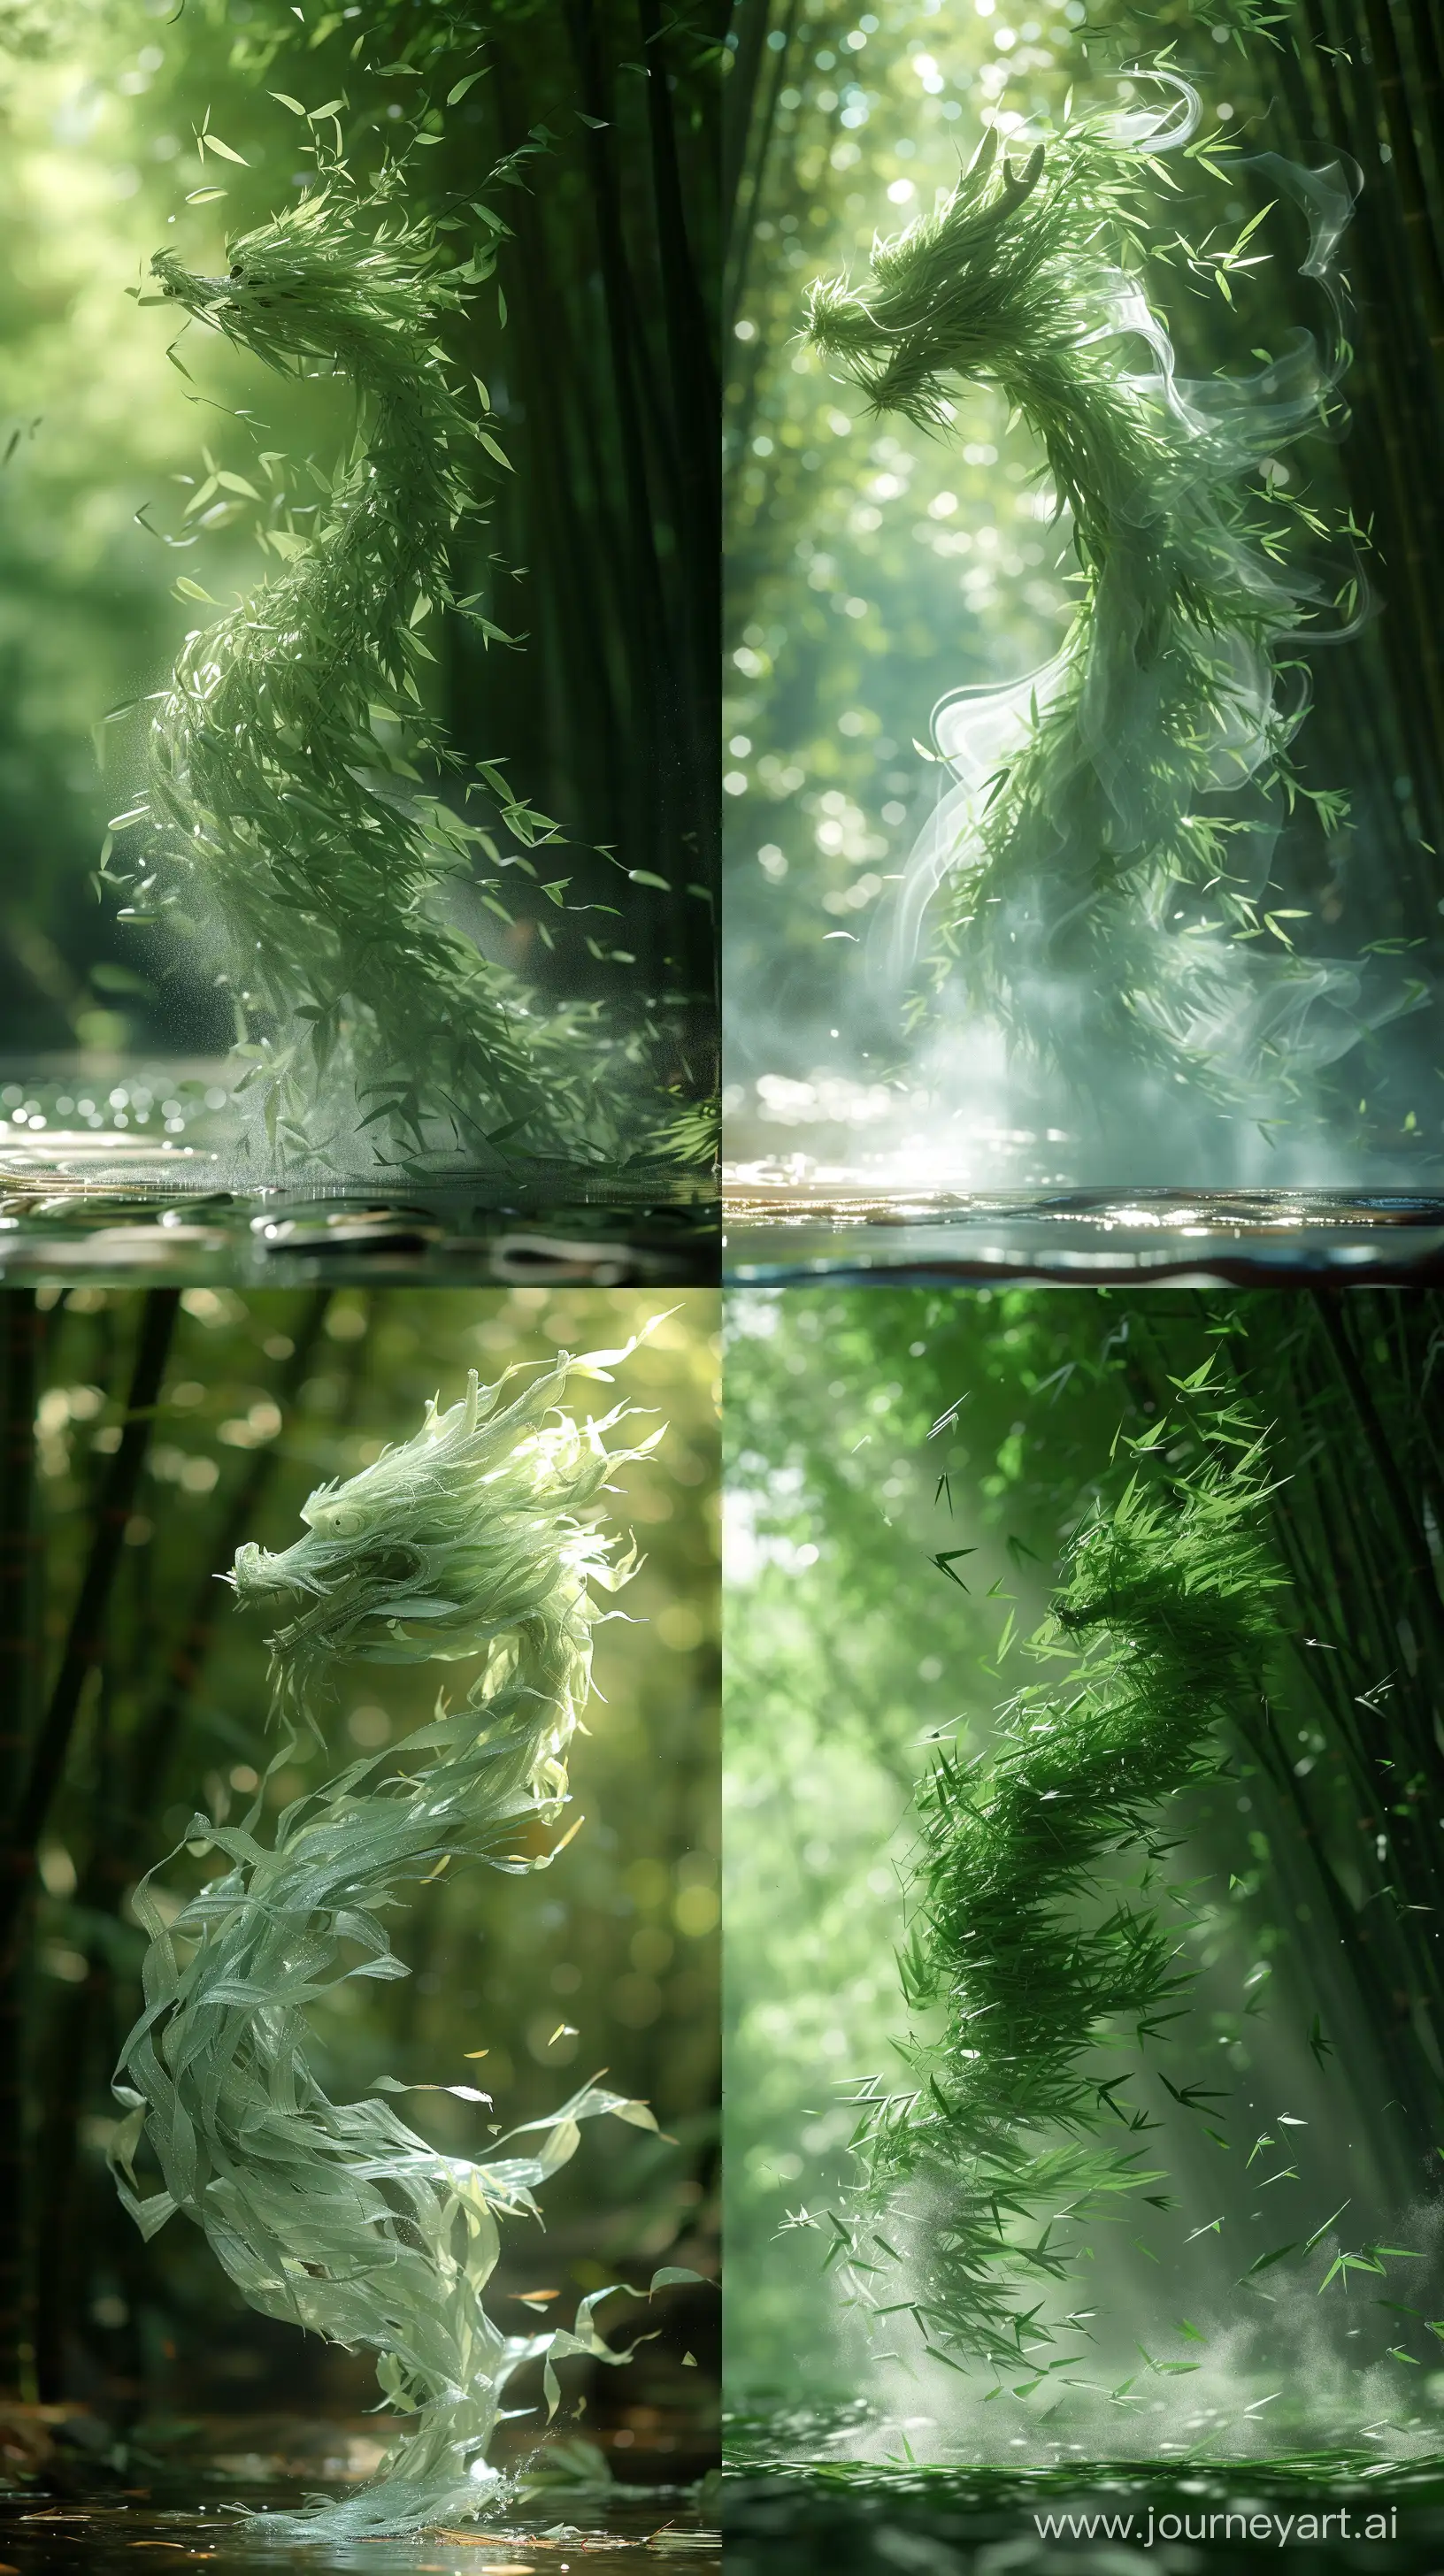 Chinese dragon made of bamboo leaves, moment bamboo leaves are swept up by the wind, forming a vague shape of a dragon in mid-air, The dragon shape is ethereal and almost transparent, The scene is set in a lush bamboo forest with sunlight filtering through, , Close-up, casting dynamic shadows, blending seamlessly with the natural surroundings, Taken on: high-speed camera with a focus on capturing motion, X prompt, hd quality, natural style --ar 9:16 --stylize 750 --v 6.0